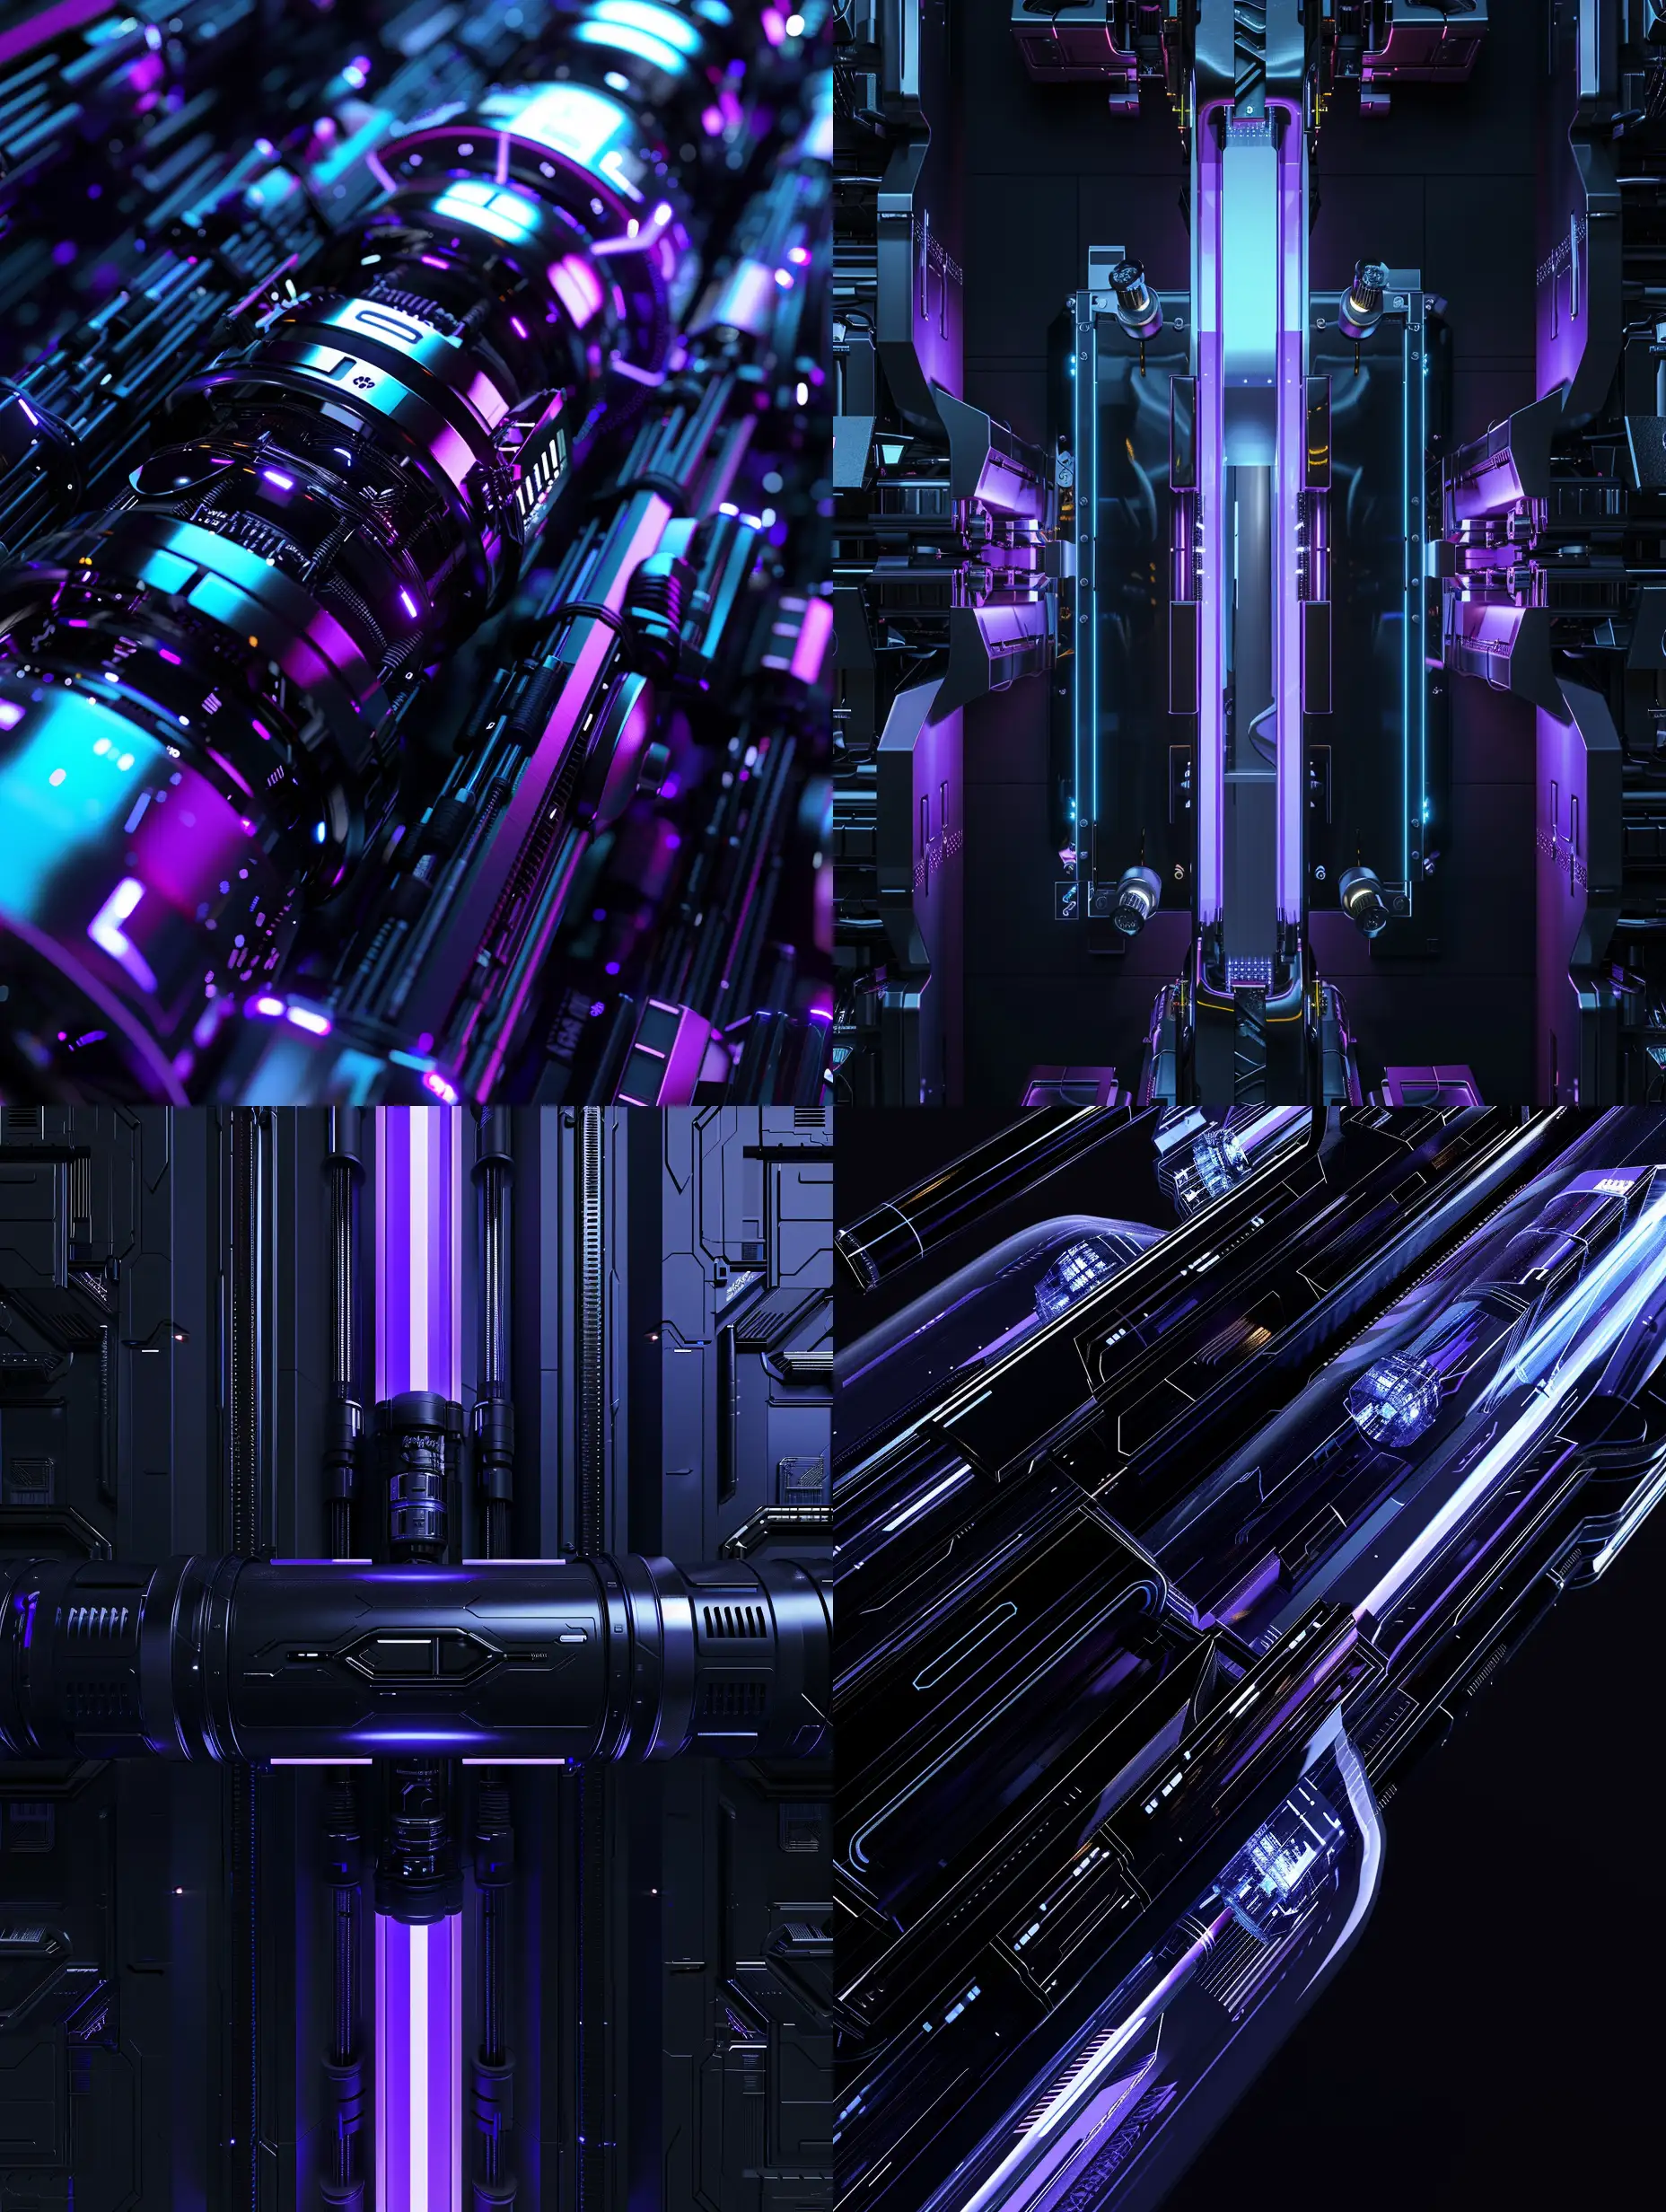 Futuristic-3D-Object-on-Black-Background-HighTech-Blue-and-Purple-Rendering